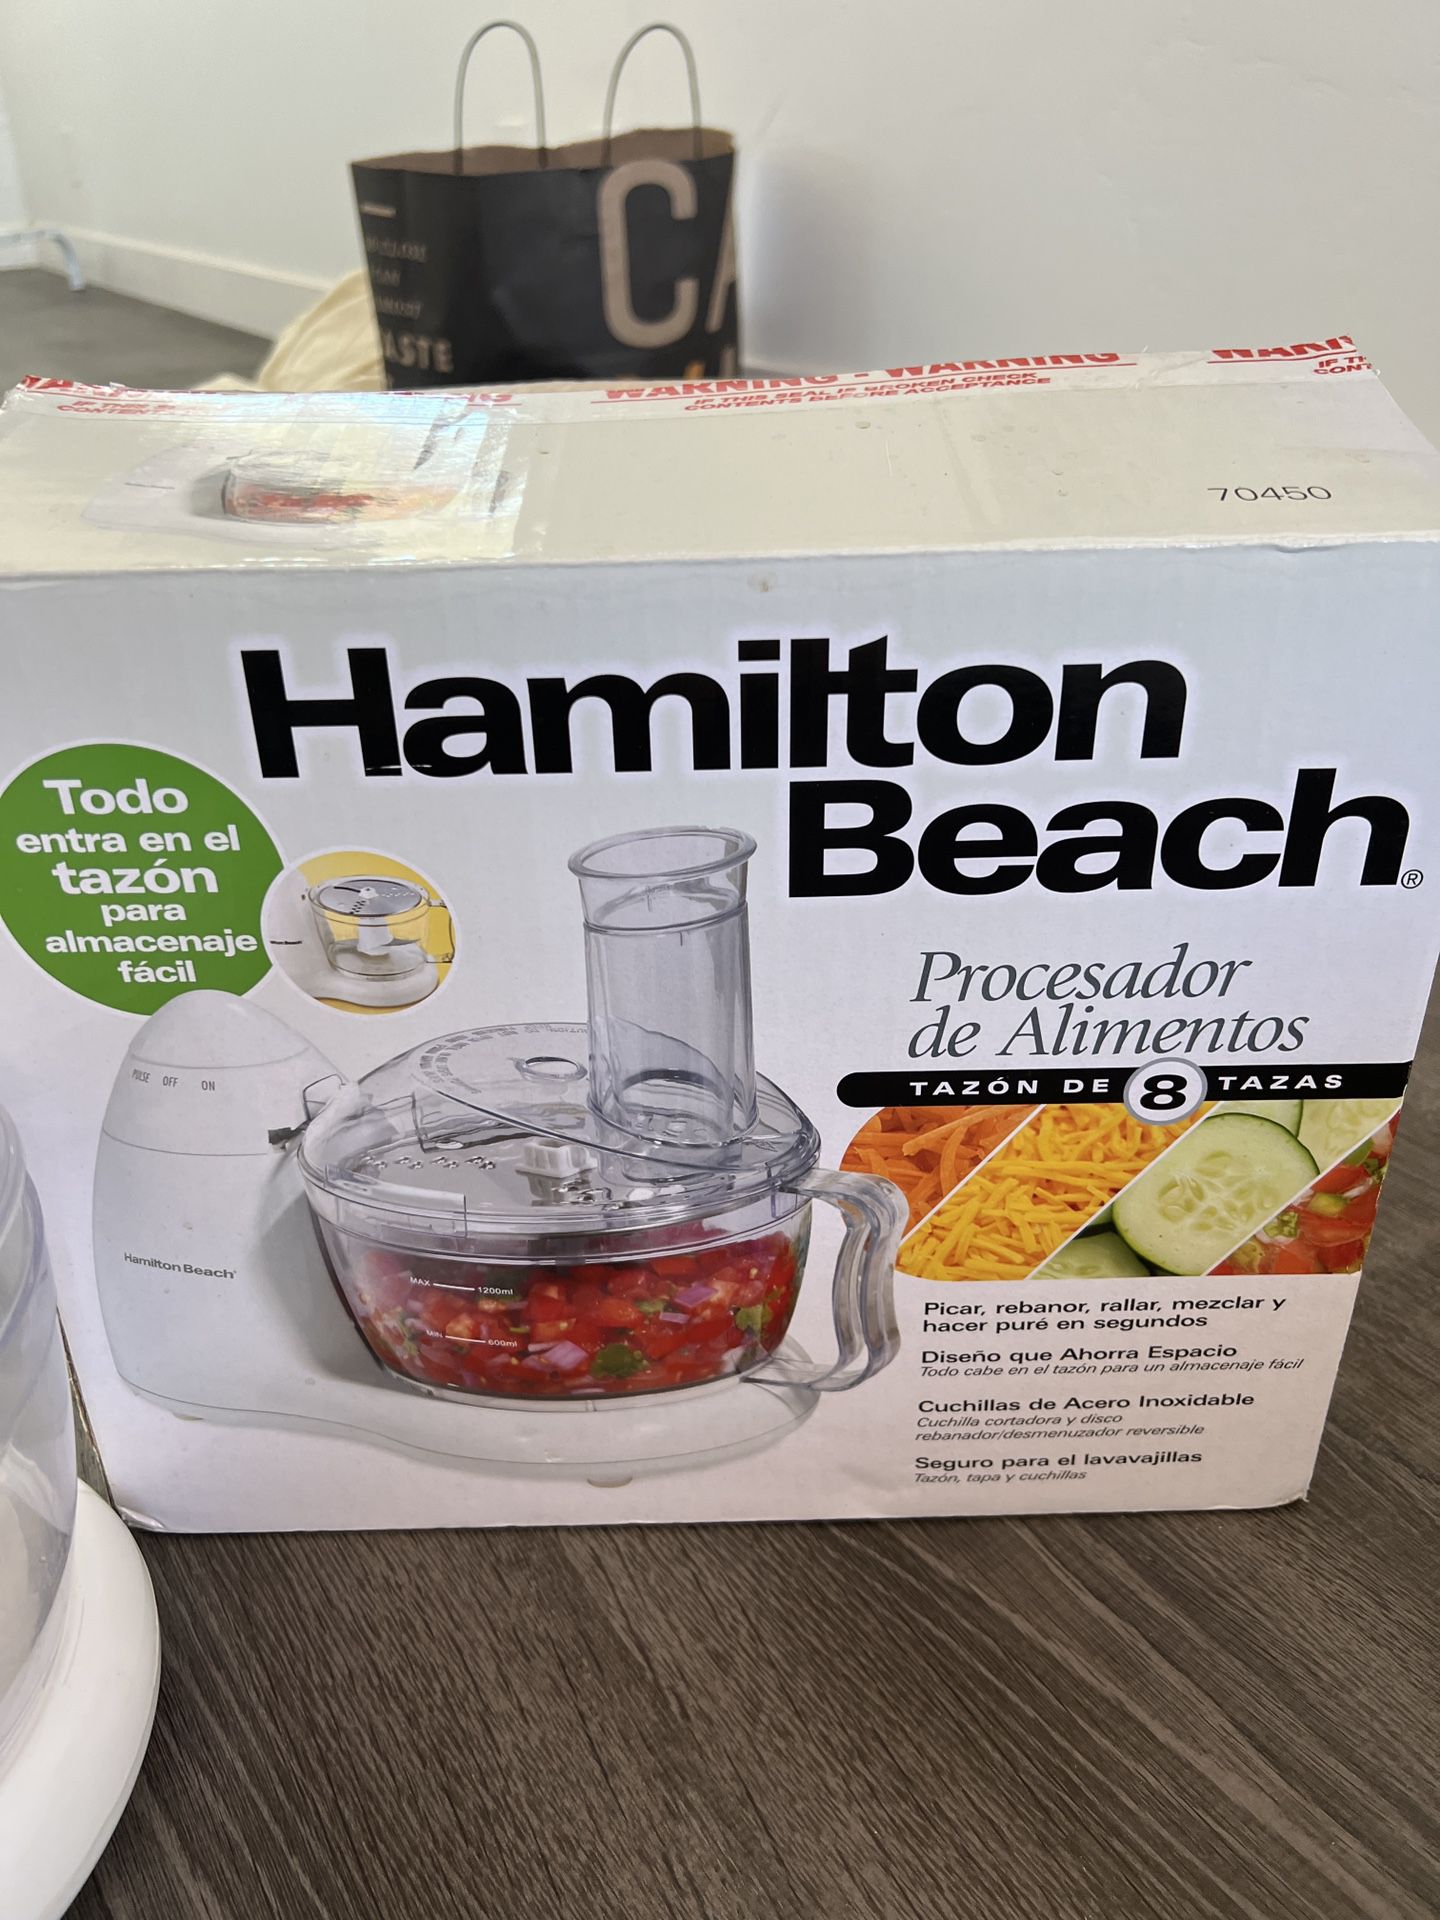 Saladmaster Food Processor for Sale in San Diego, CA - OfferUp